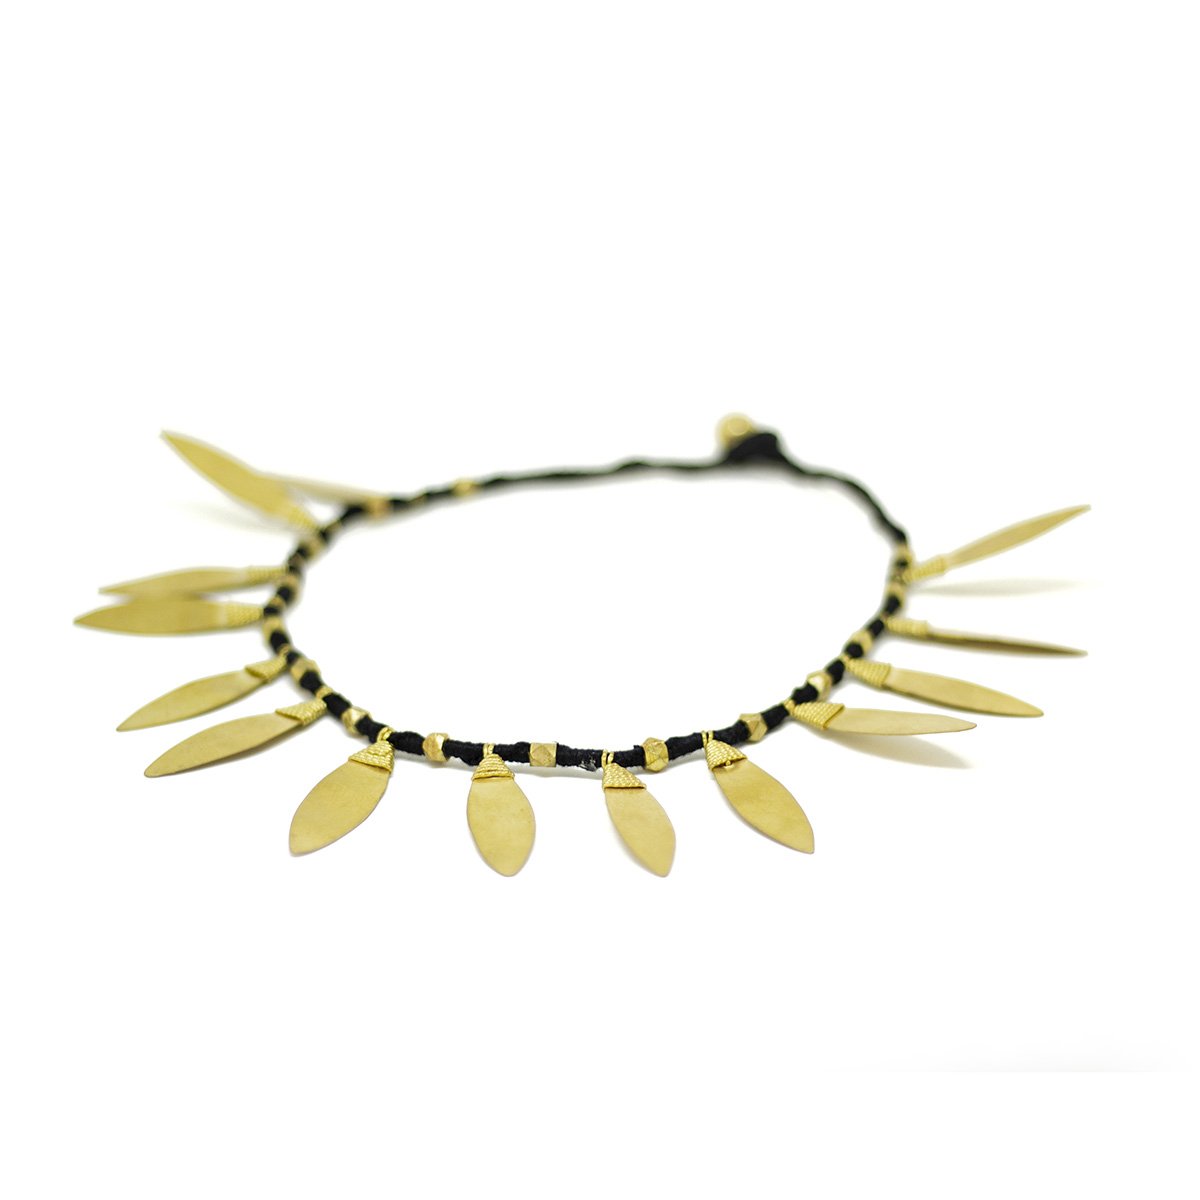 hand-braided brass necklace from India - een stip